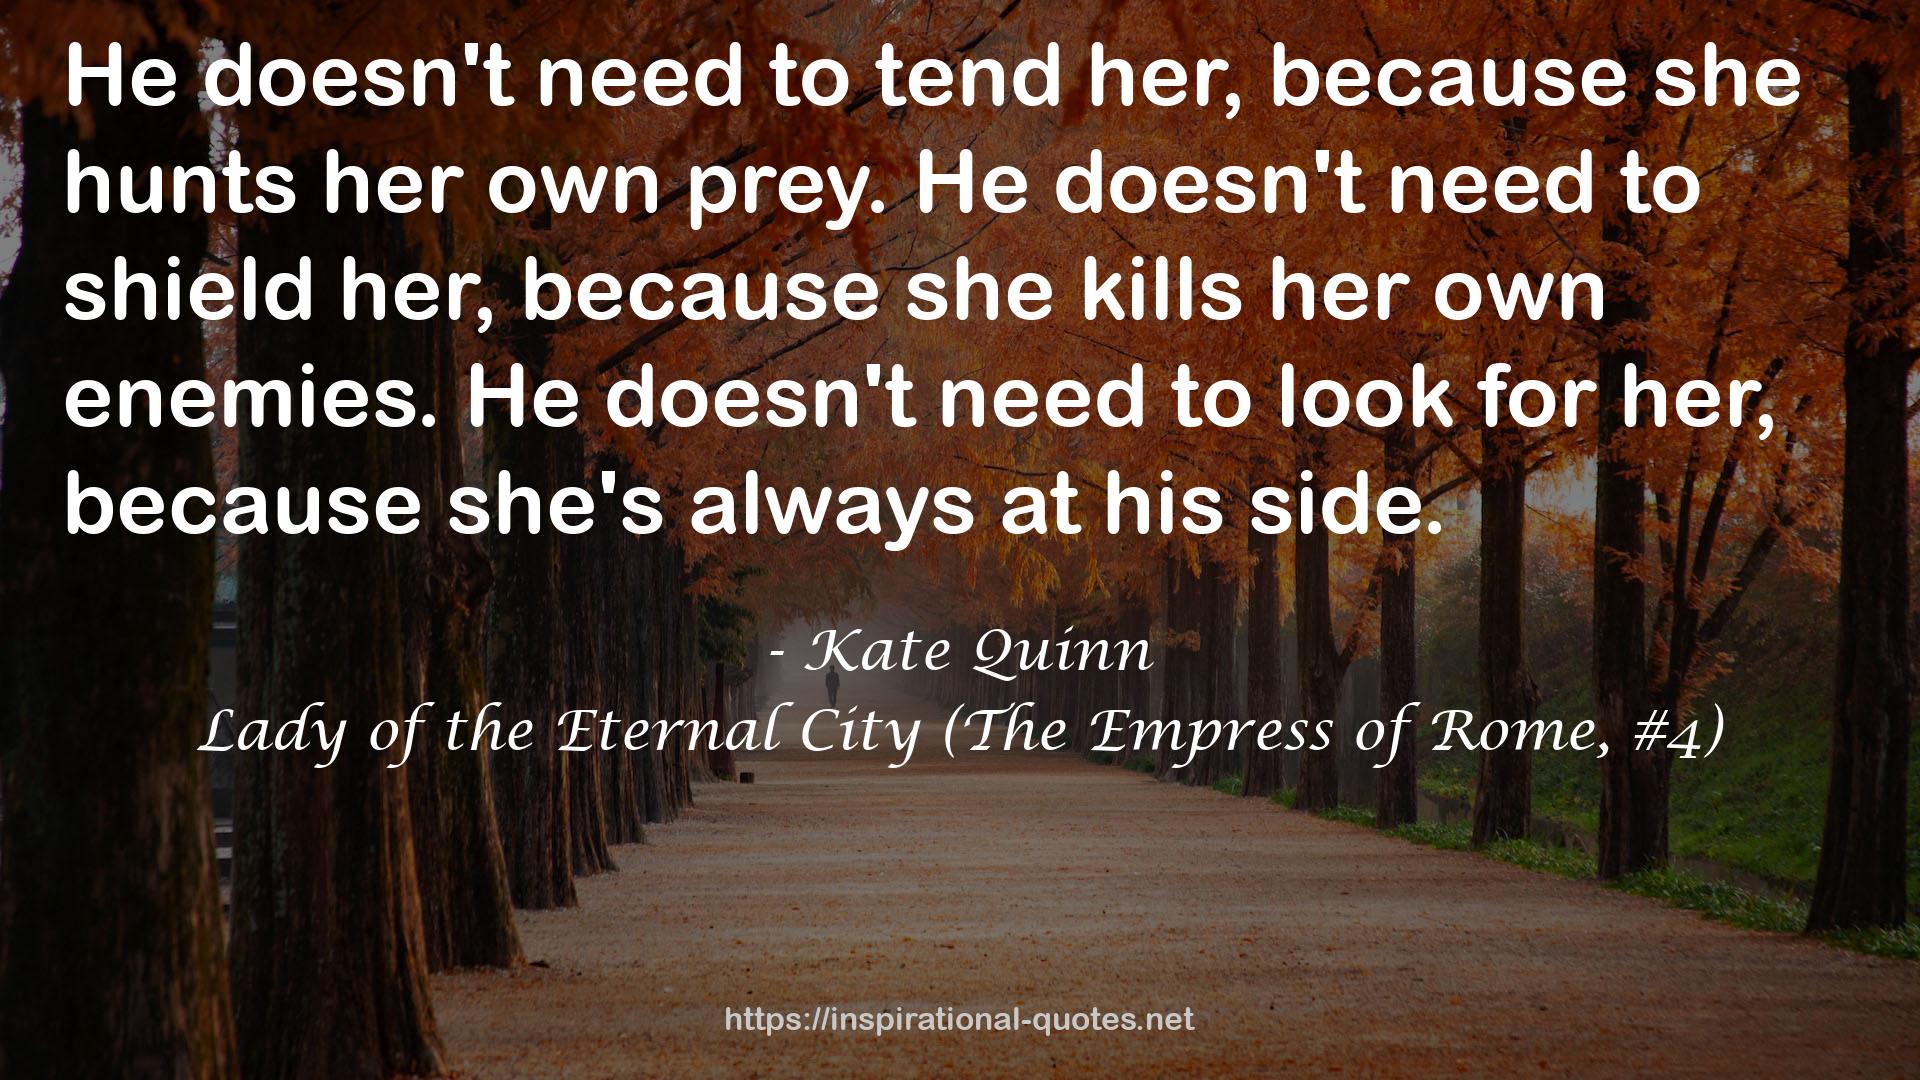 Lady of the Eternal City (The Empress of Rome, #4) QUOTES